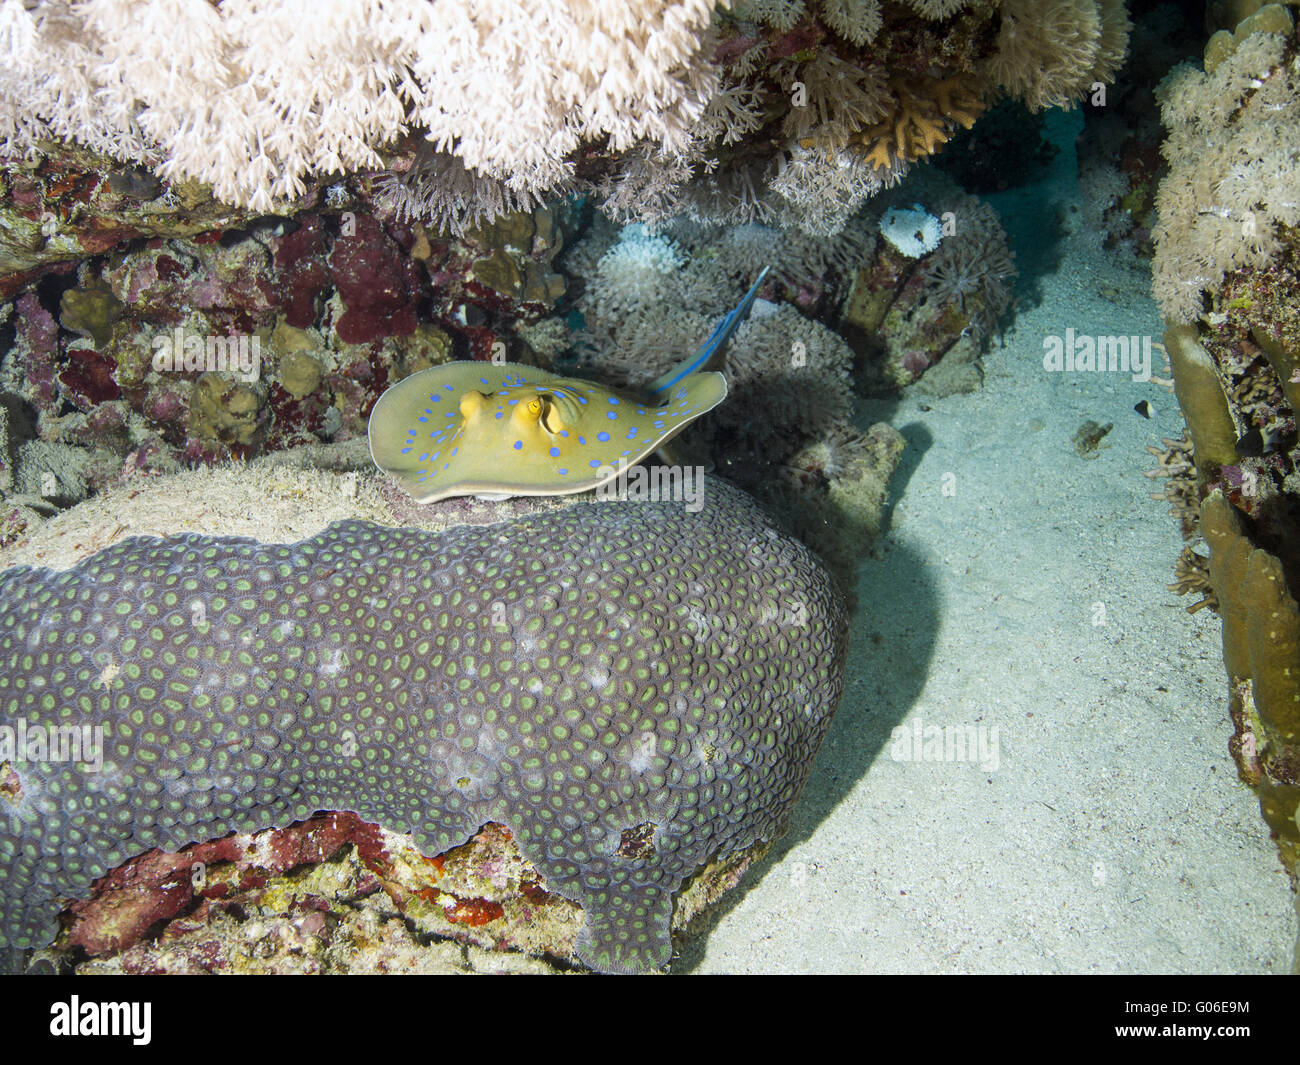 bluespotted ribbontail ray Stock Photo